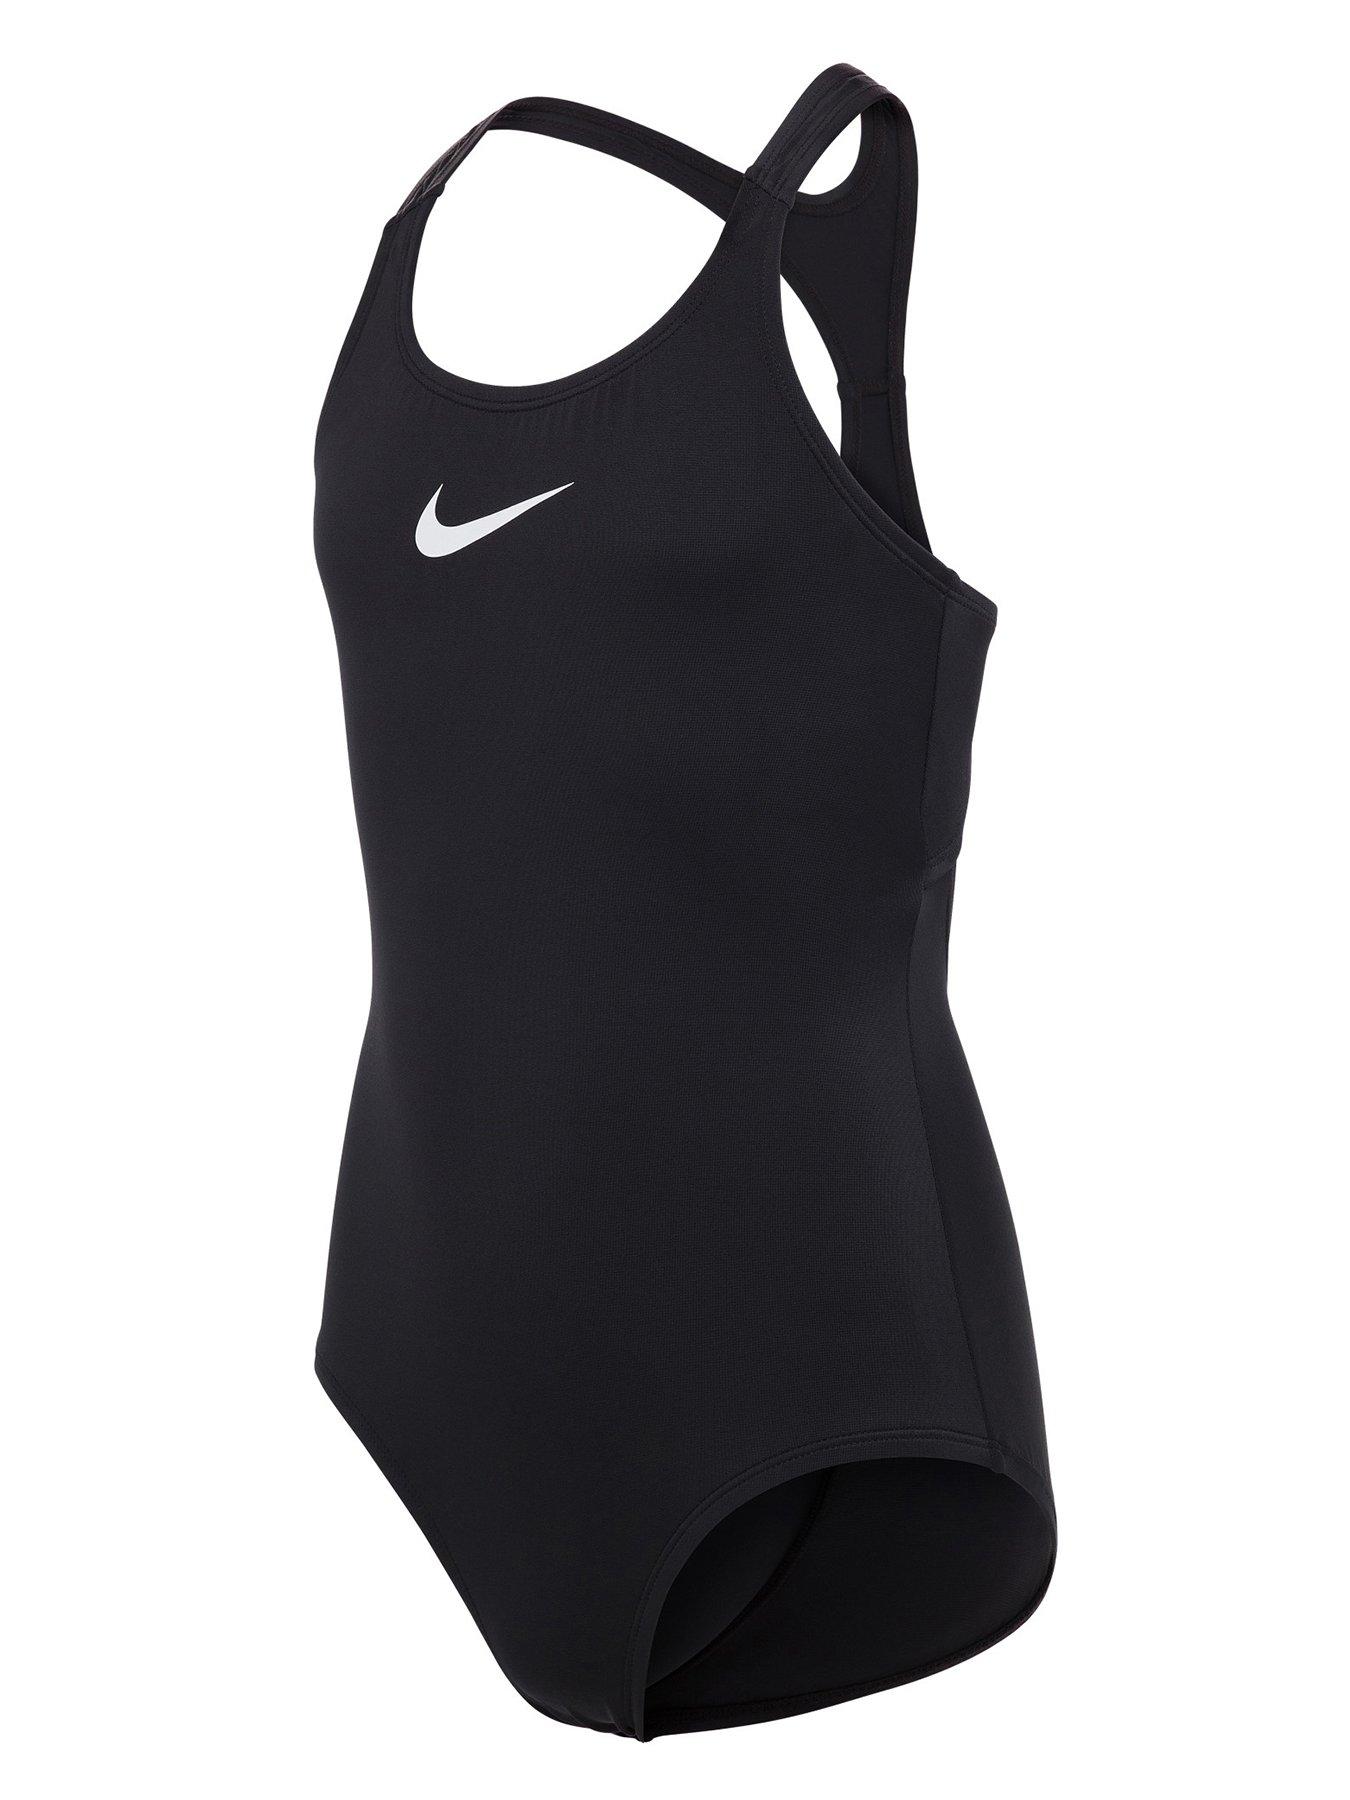 Girls clothes, Child & baby, Nike